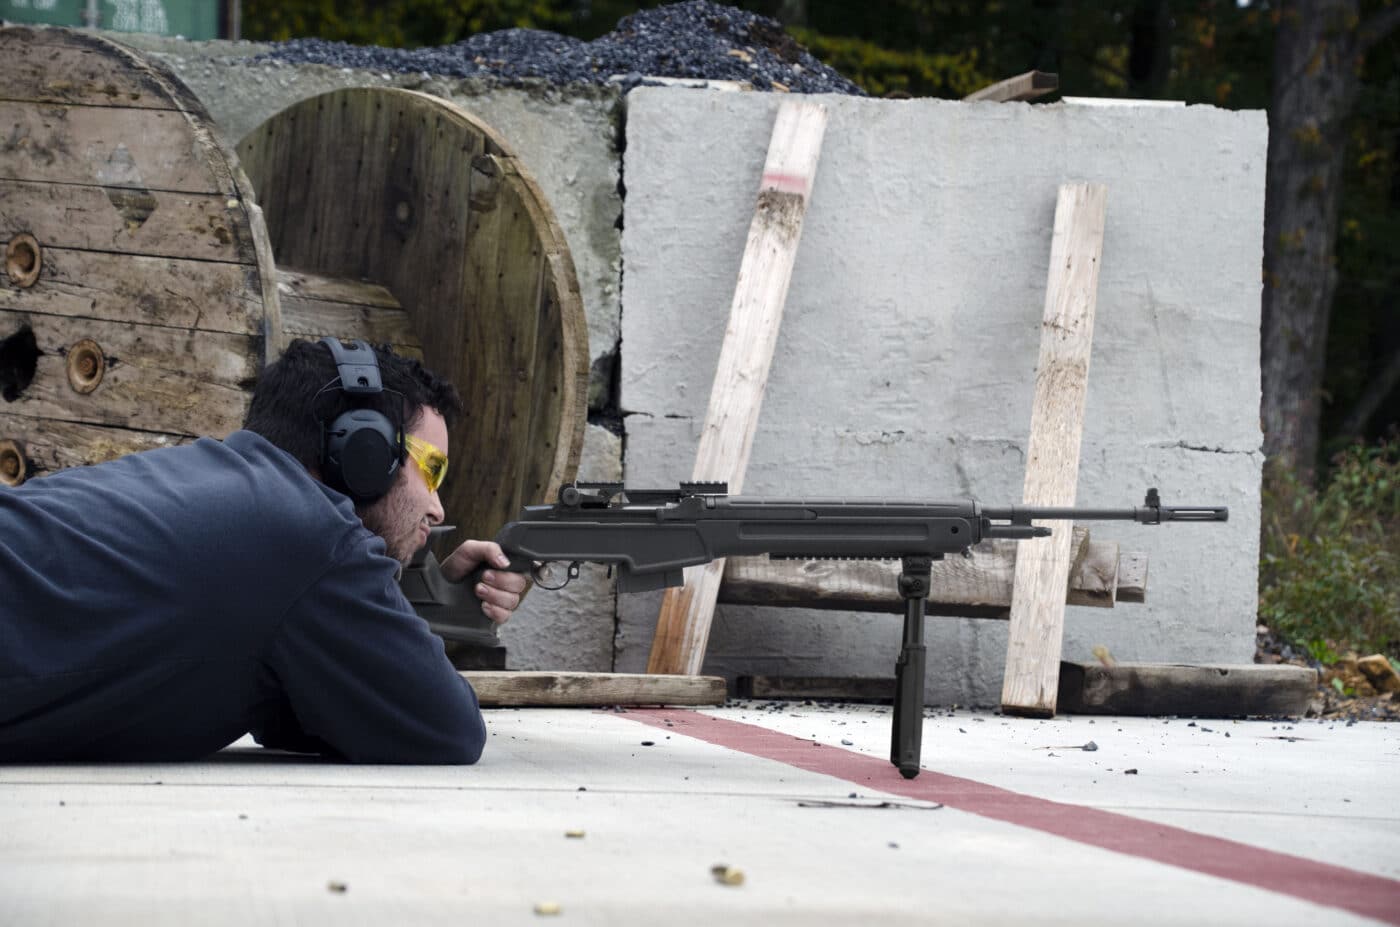 Man shooting the Springfield M1A Loaded Precision rifle